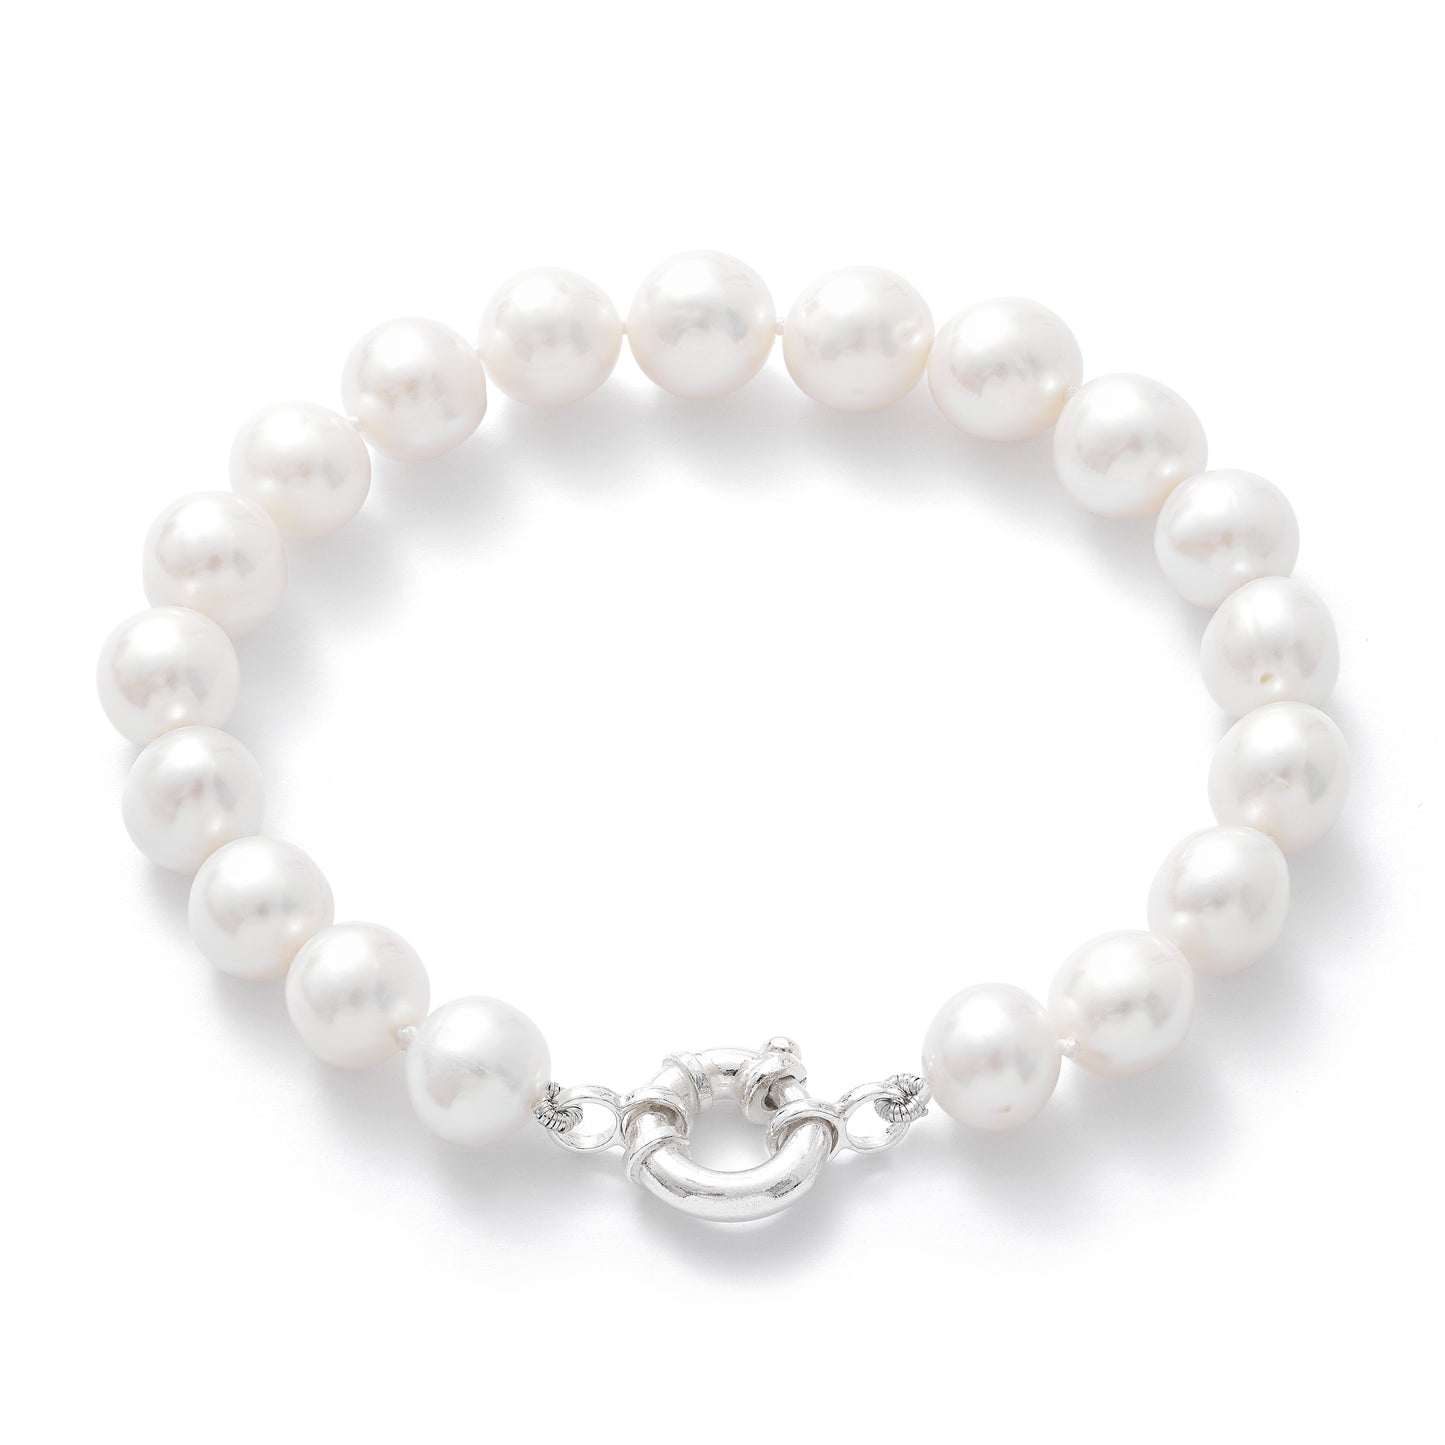 Gratia white cultured freshwater pearl bracelet with sterling silver spring clasp